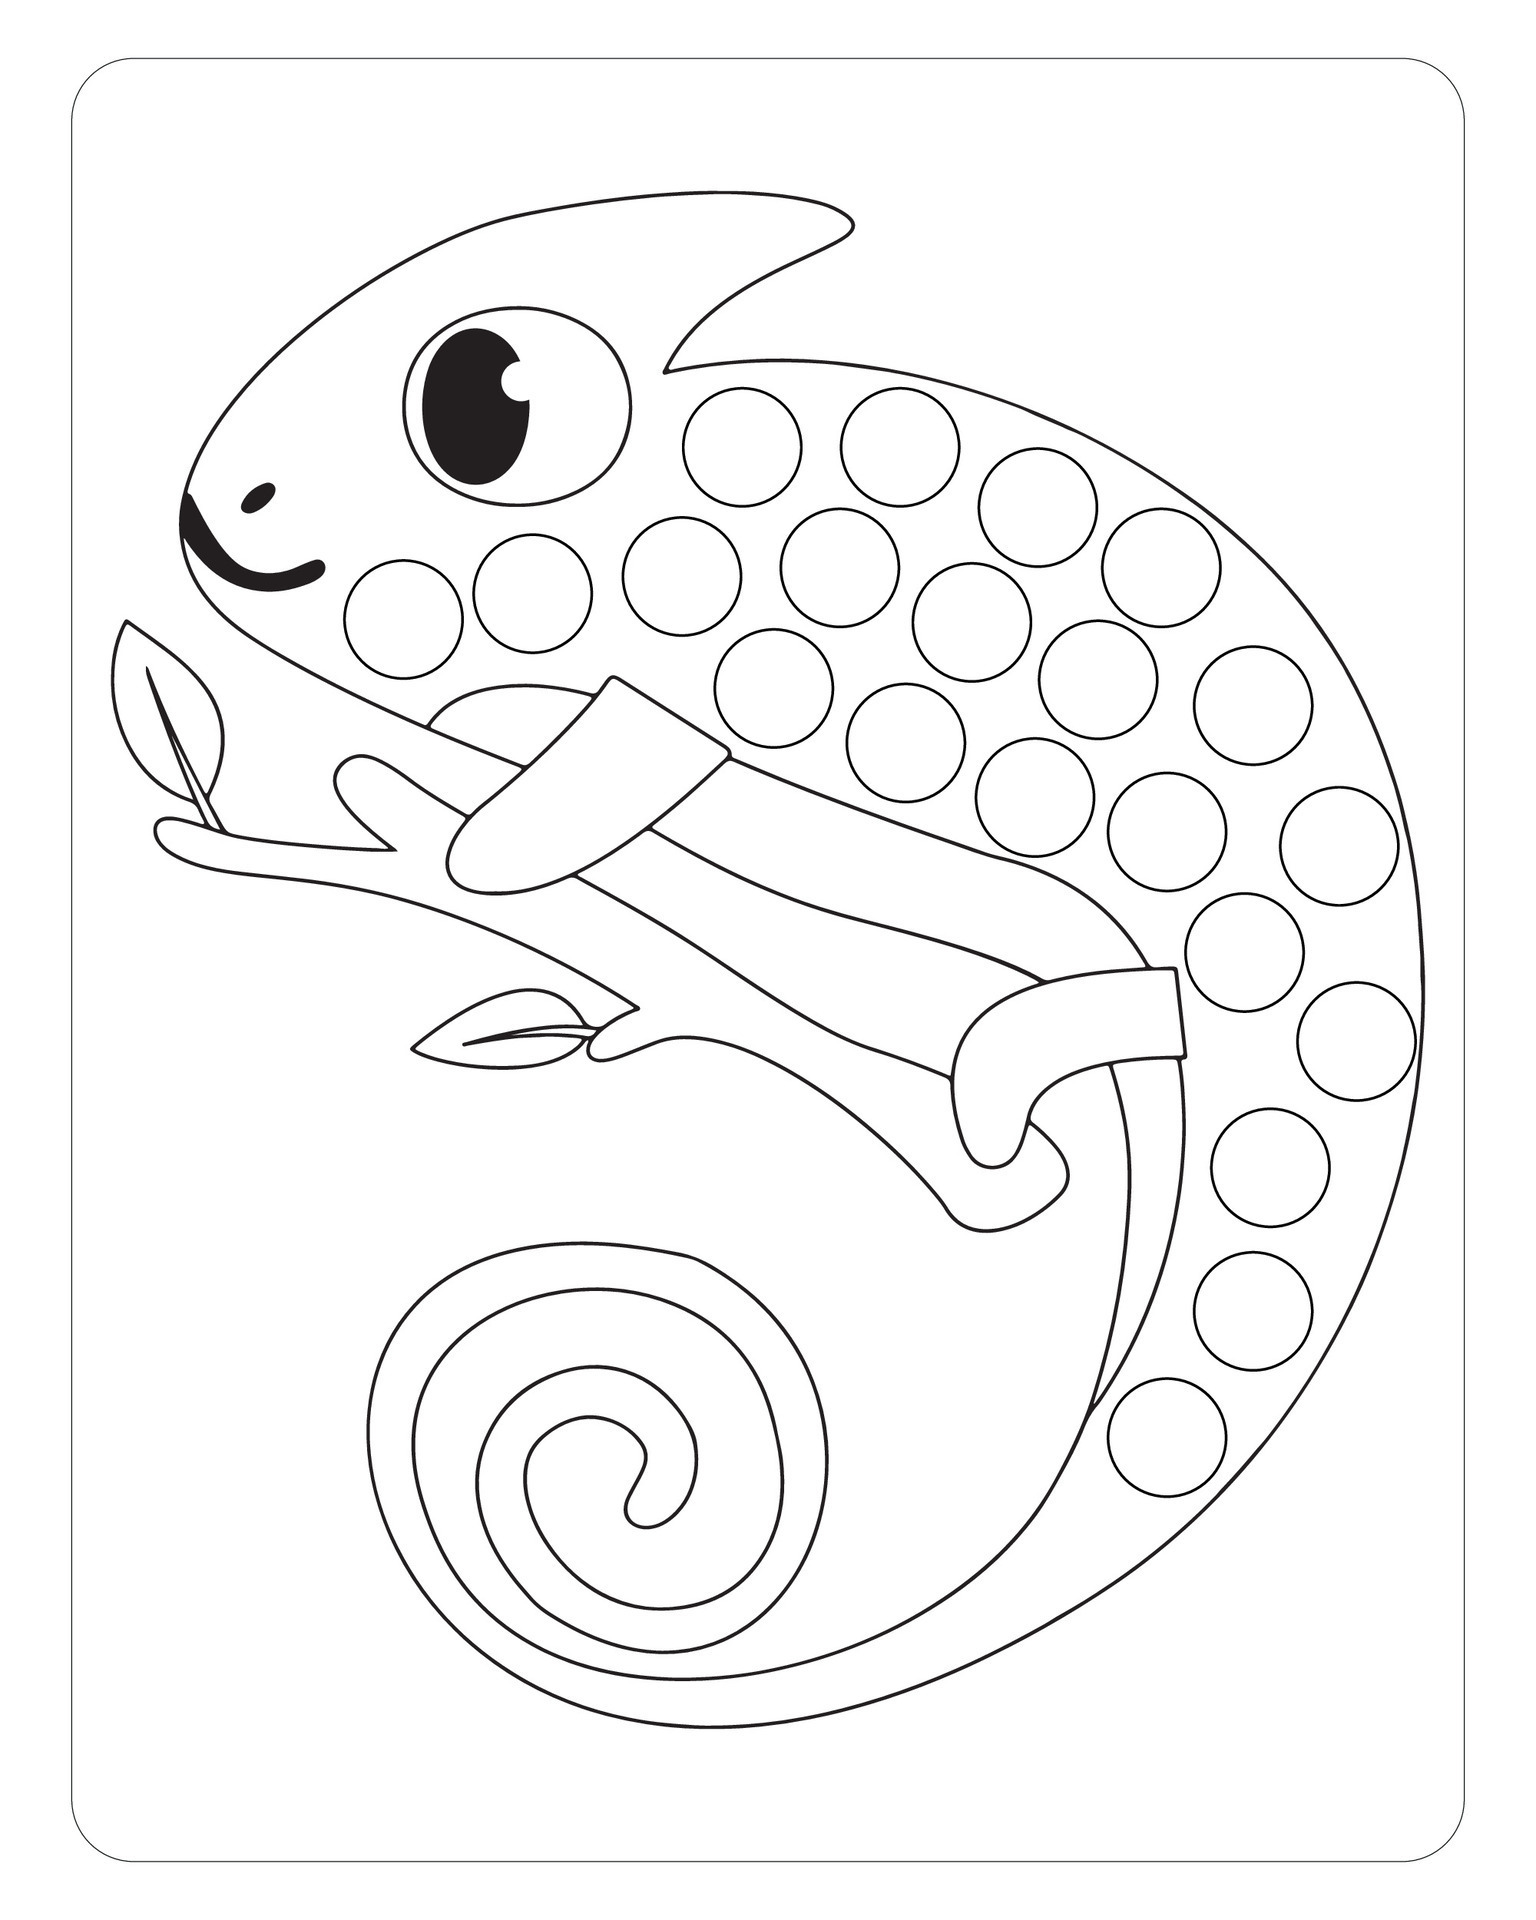 https://static.vecteezy.com/system/resources/previews/035/614/682/original/iguana-dot-marker-cute-animals-dot-marker-coloring-pages-for-kids-vector.jpg